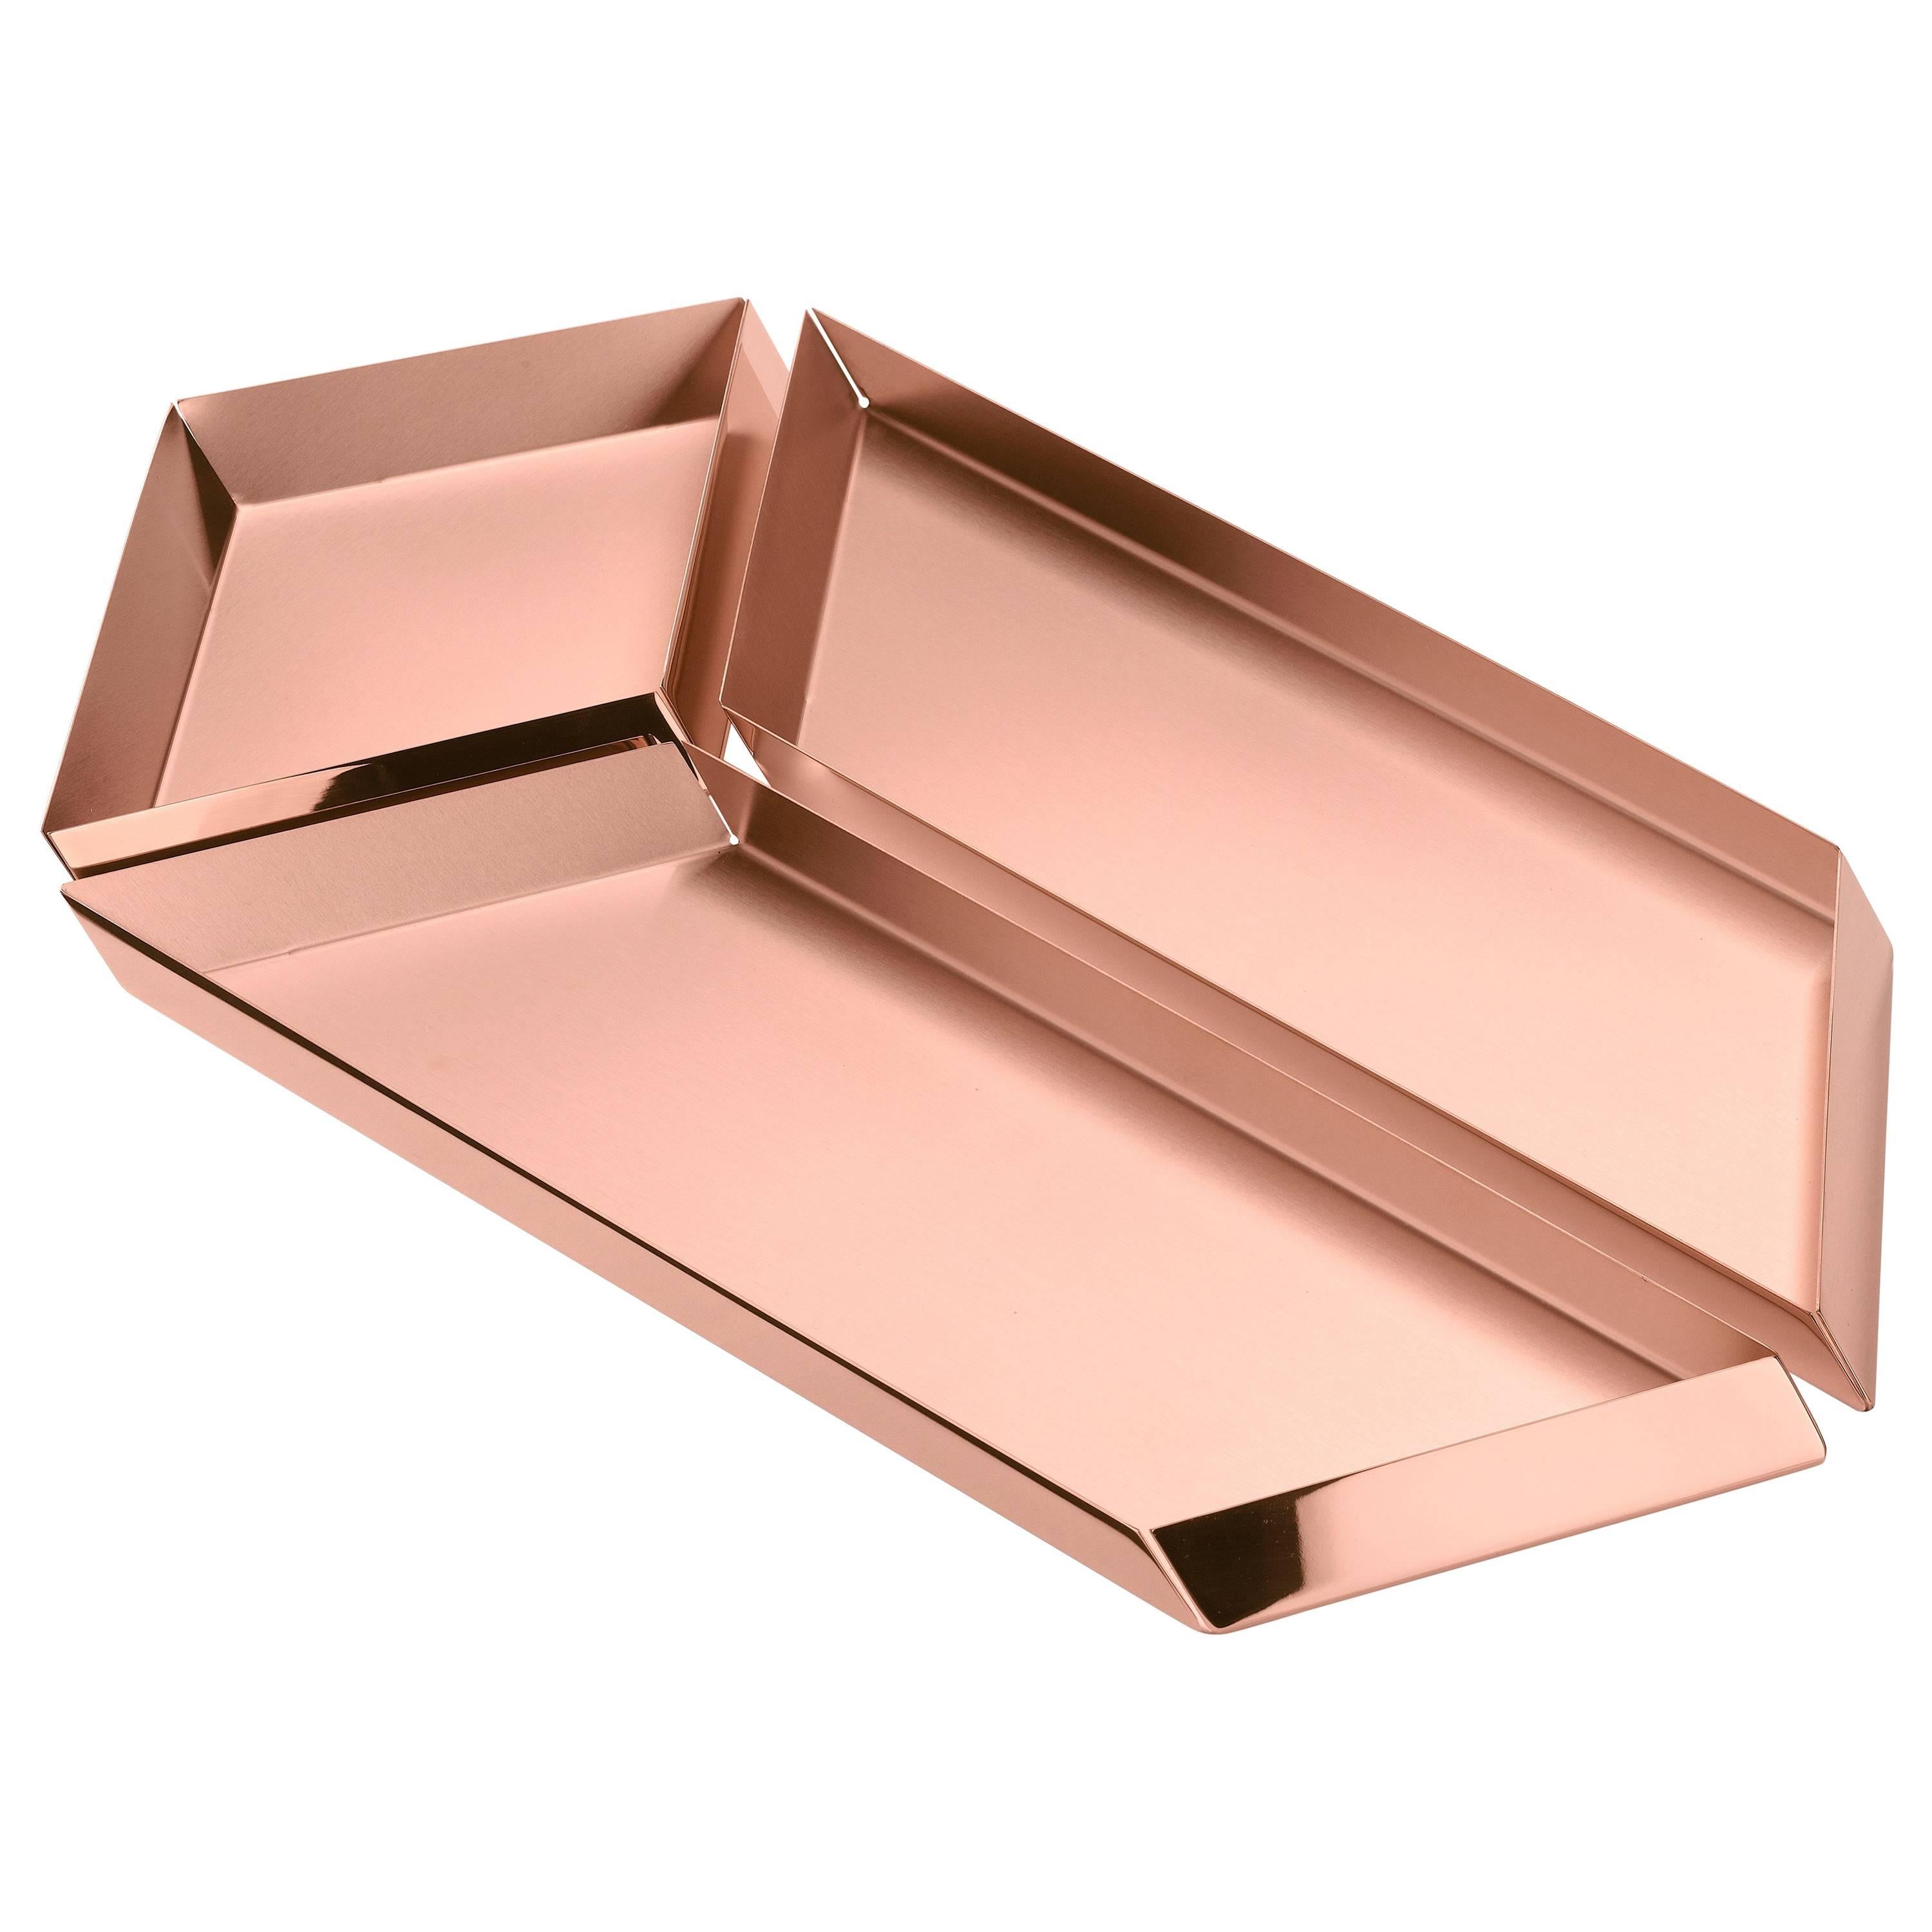 Ghidini 1961 Axonometry Set 4 Large Parallelepiped Tray Set in Rose Gold Finish